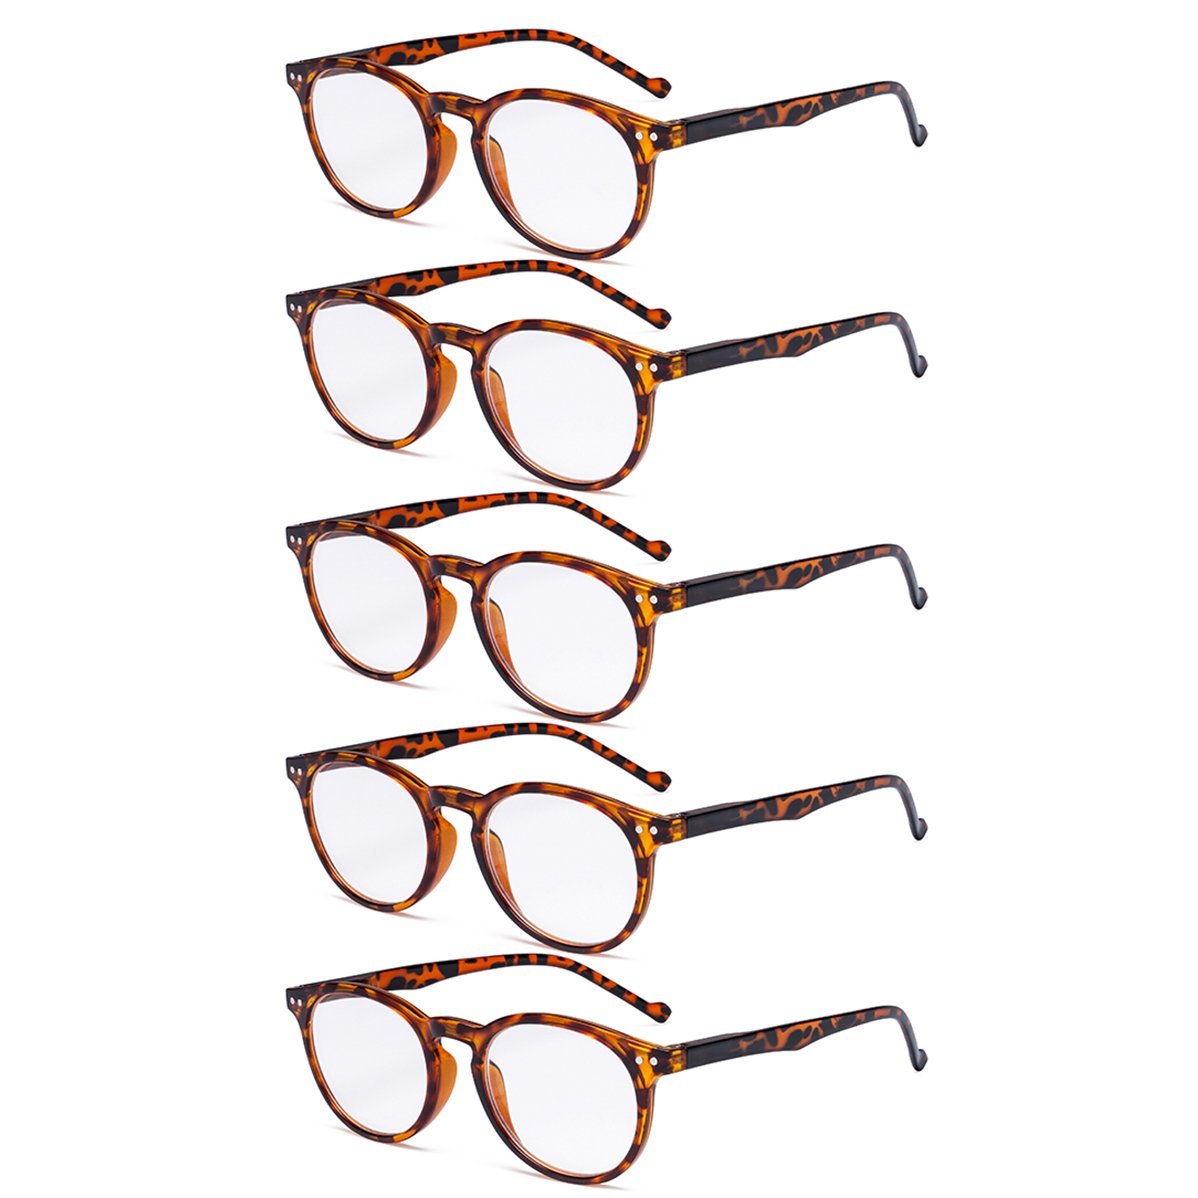 5 Pack Oval Round Reading Glasses for Men and Women R071